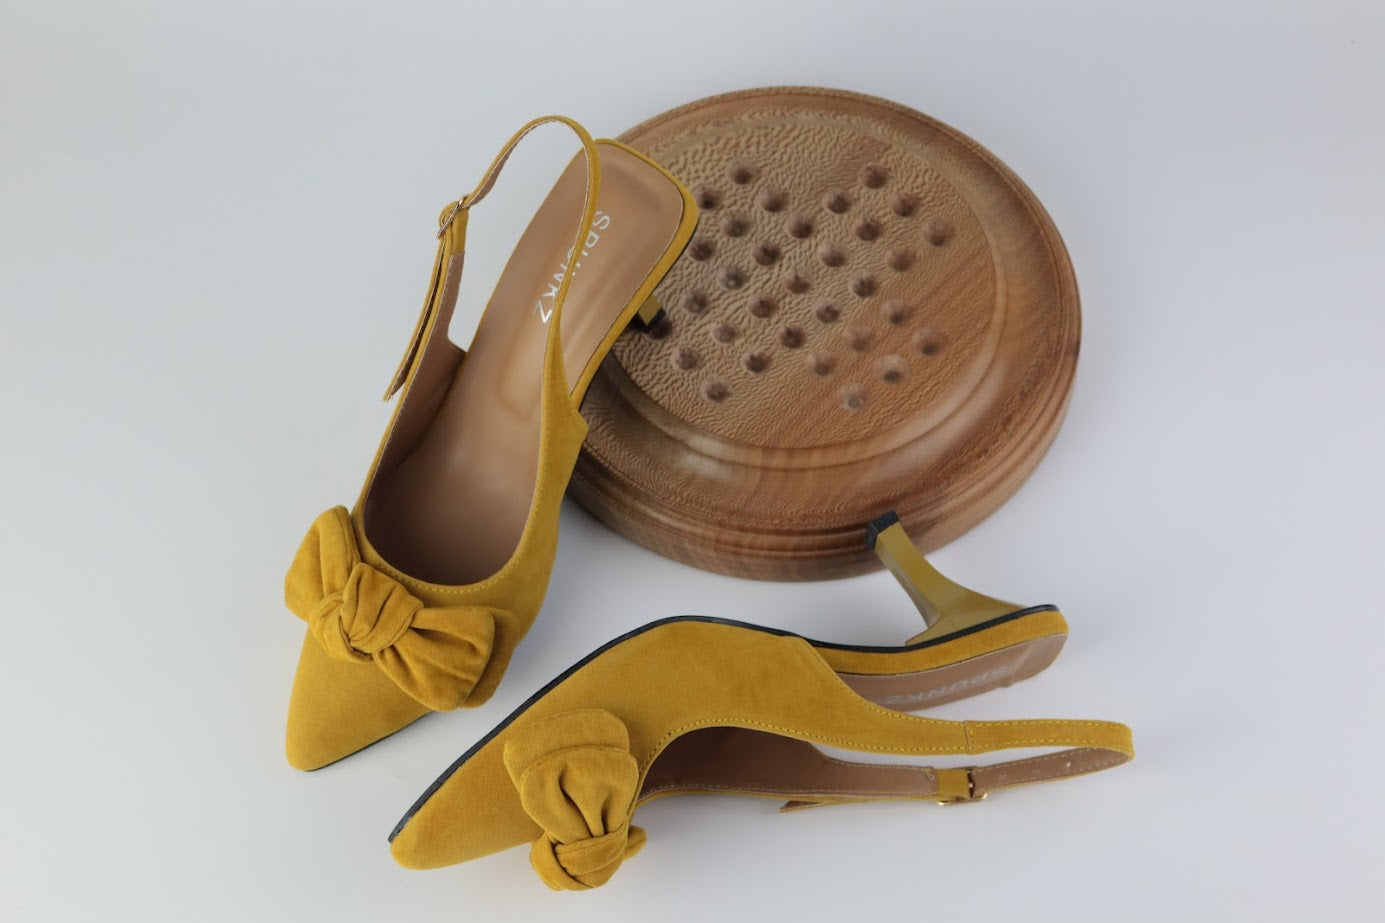 Melina Pointed Toe Mustard Flower Knotted Bow Heel